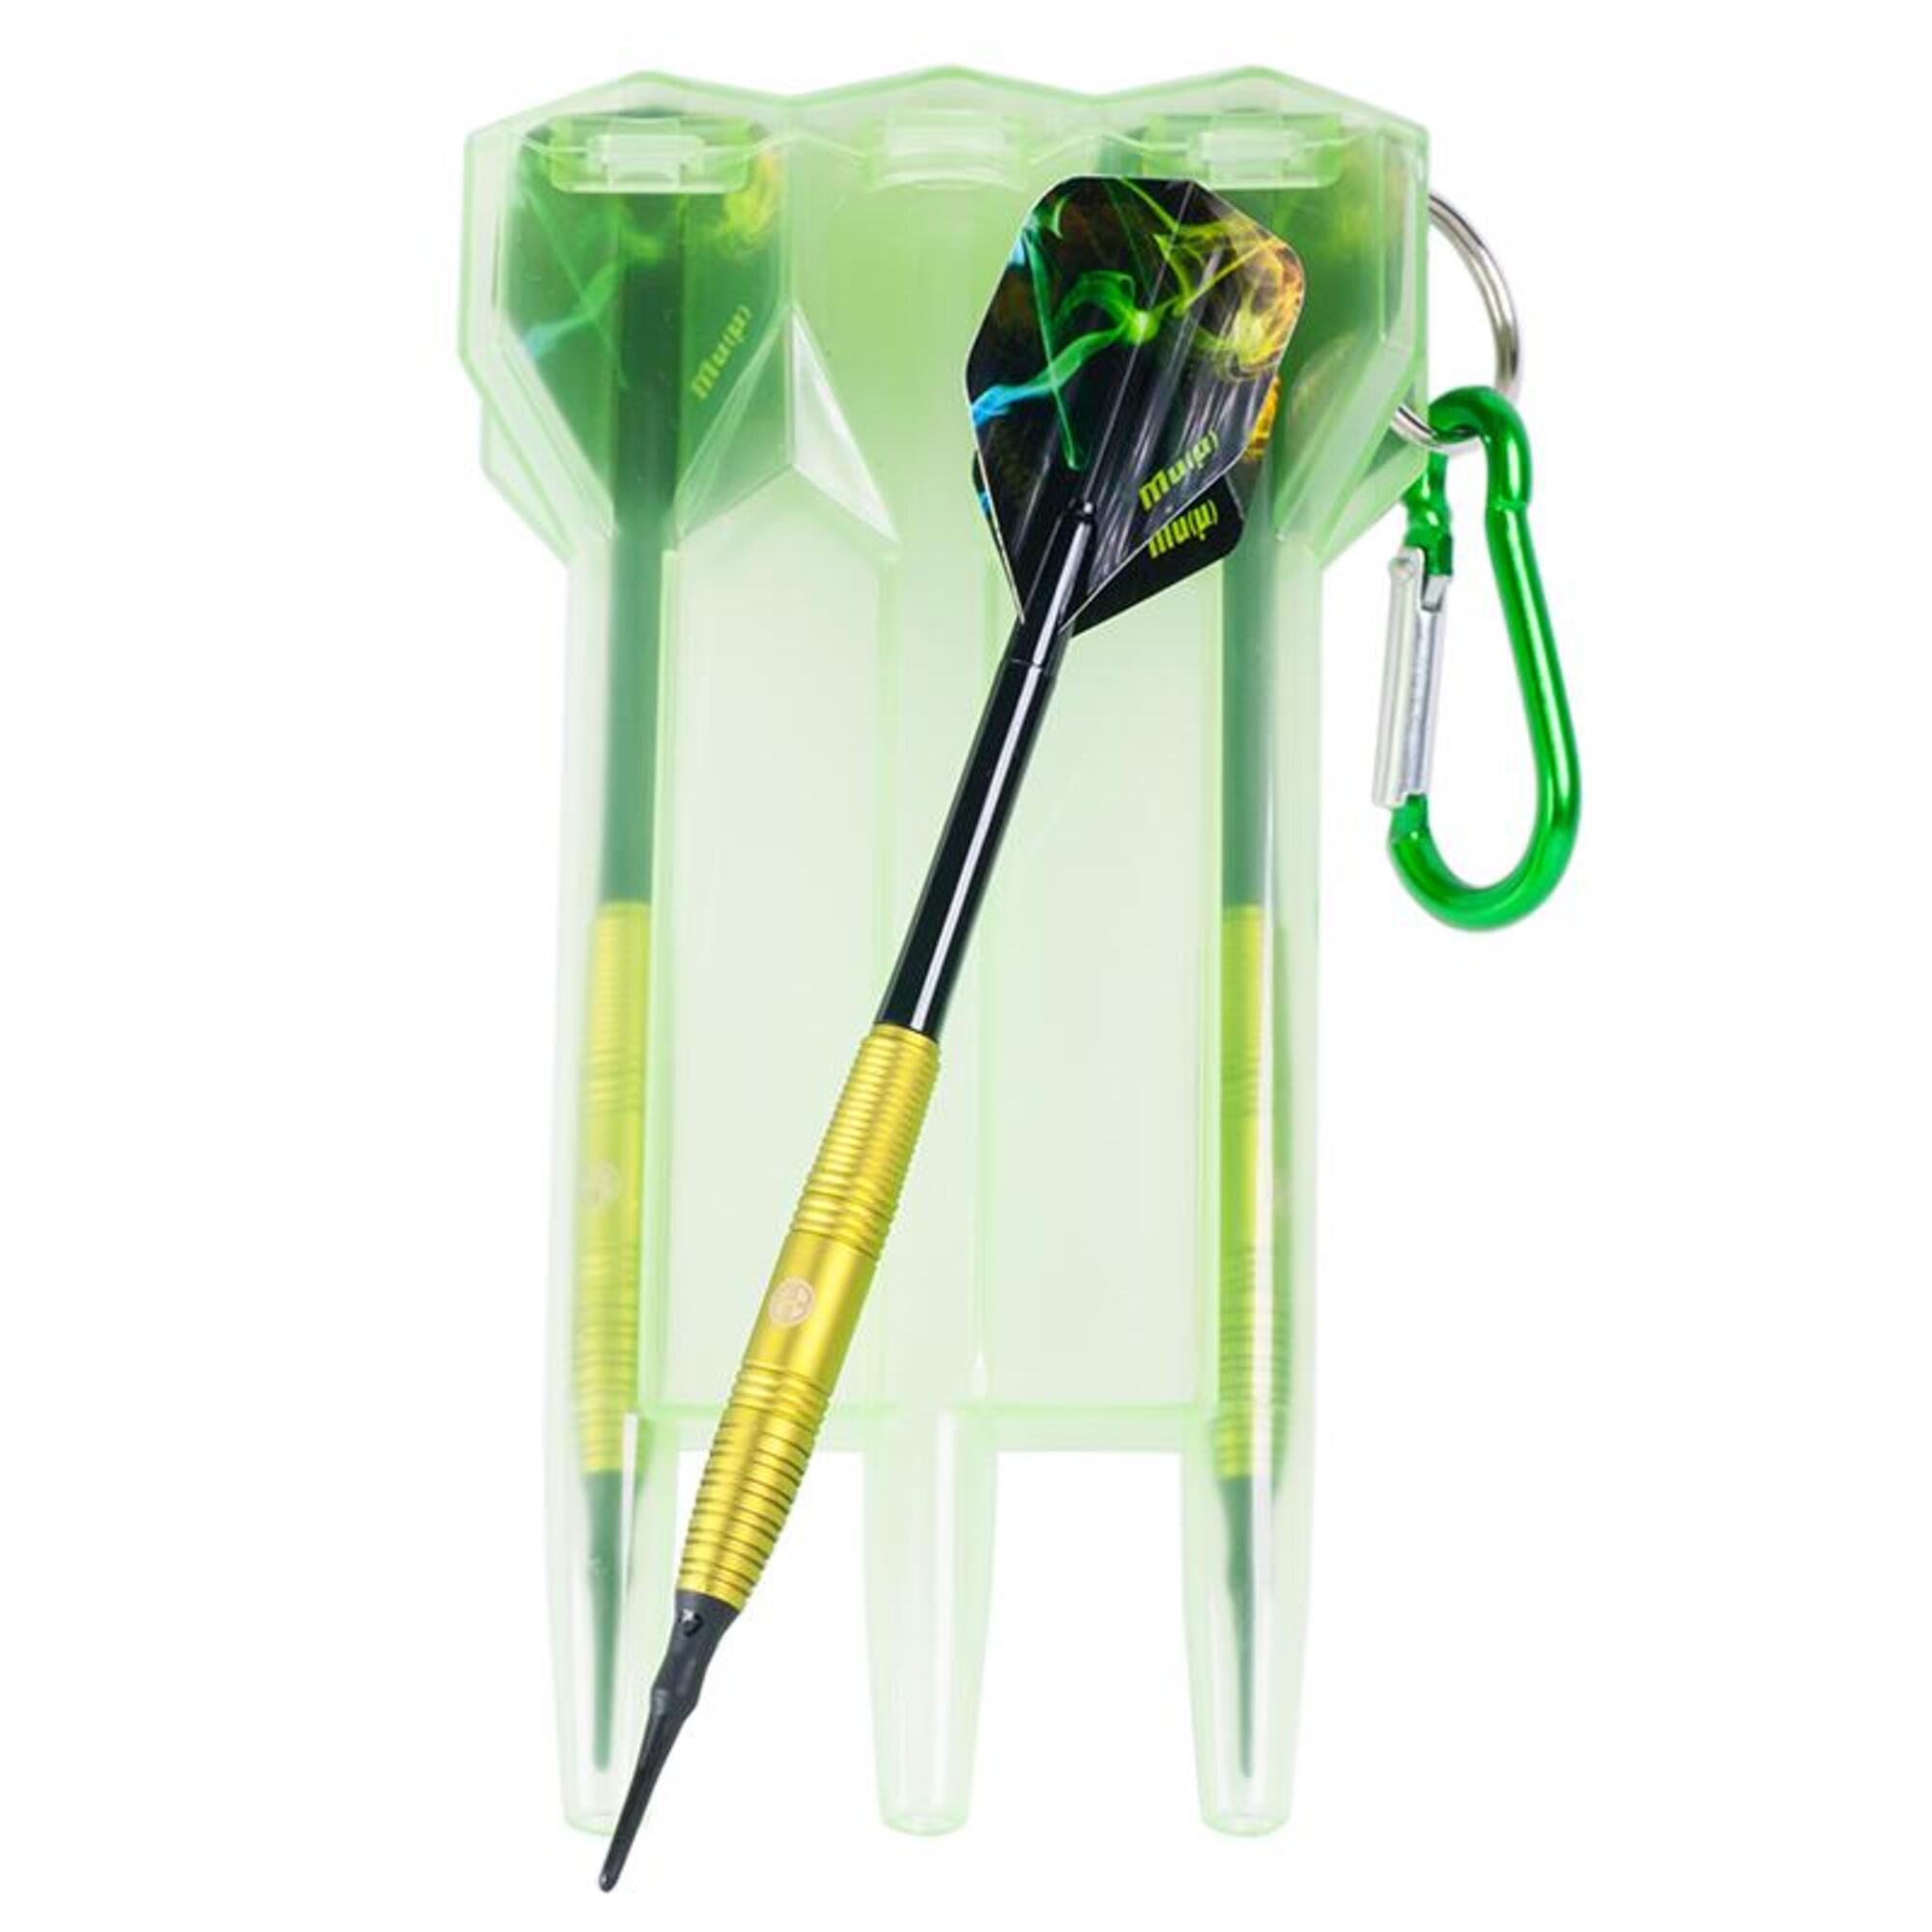 NON-SLIP 02 Darts Set with case - Lime